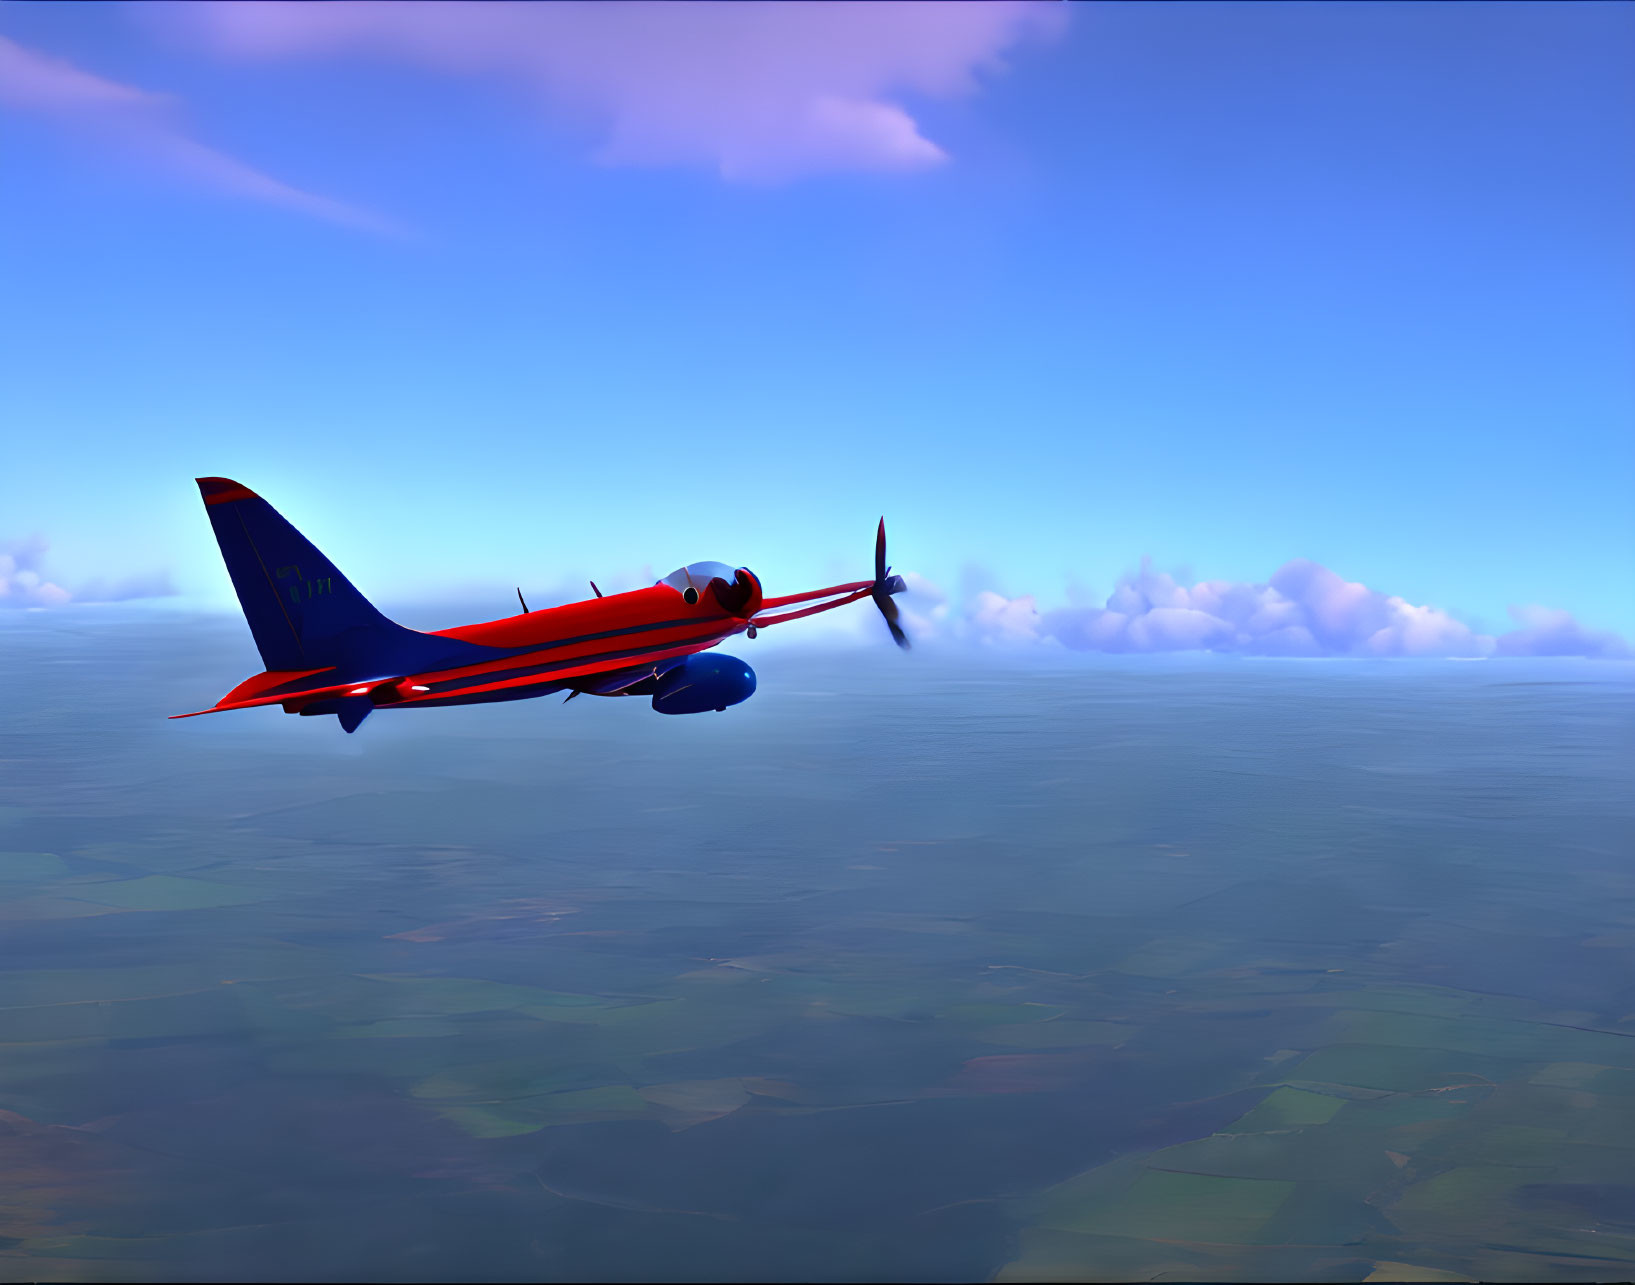 Red and Blue Aircraft Flying Above Green Landscape